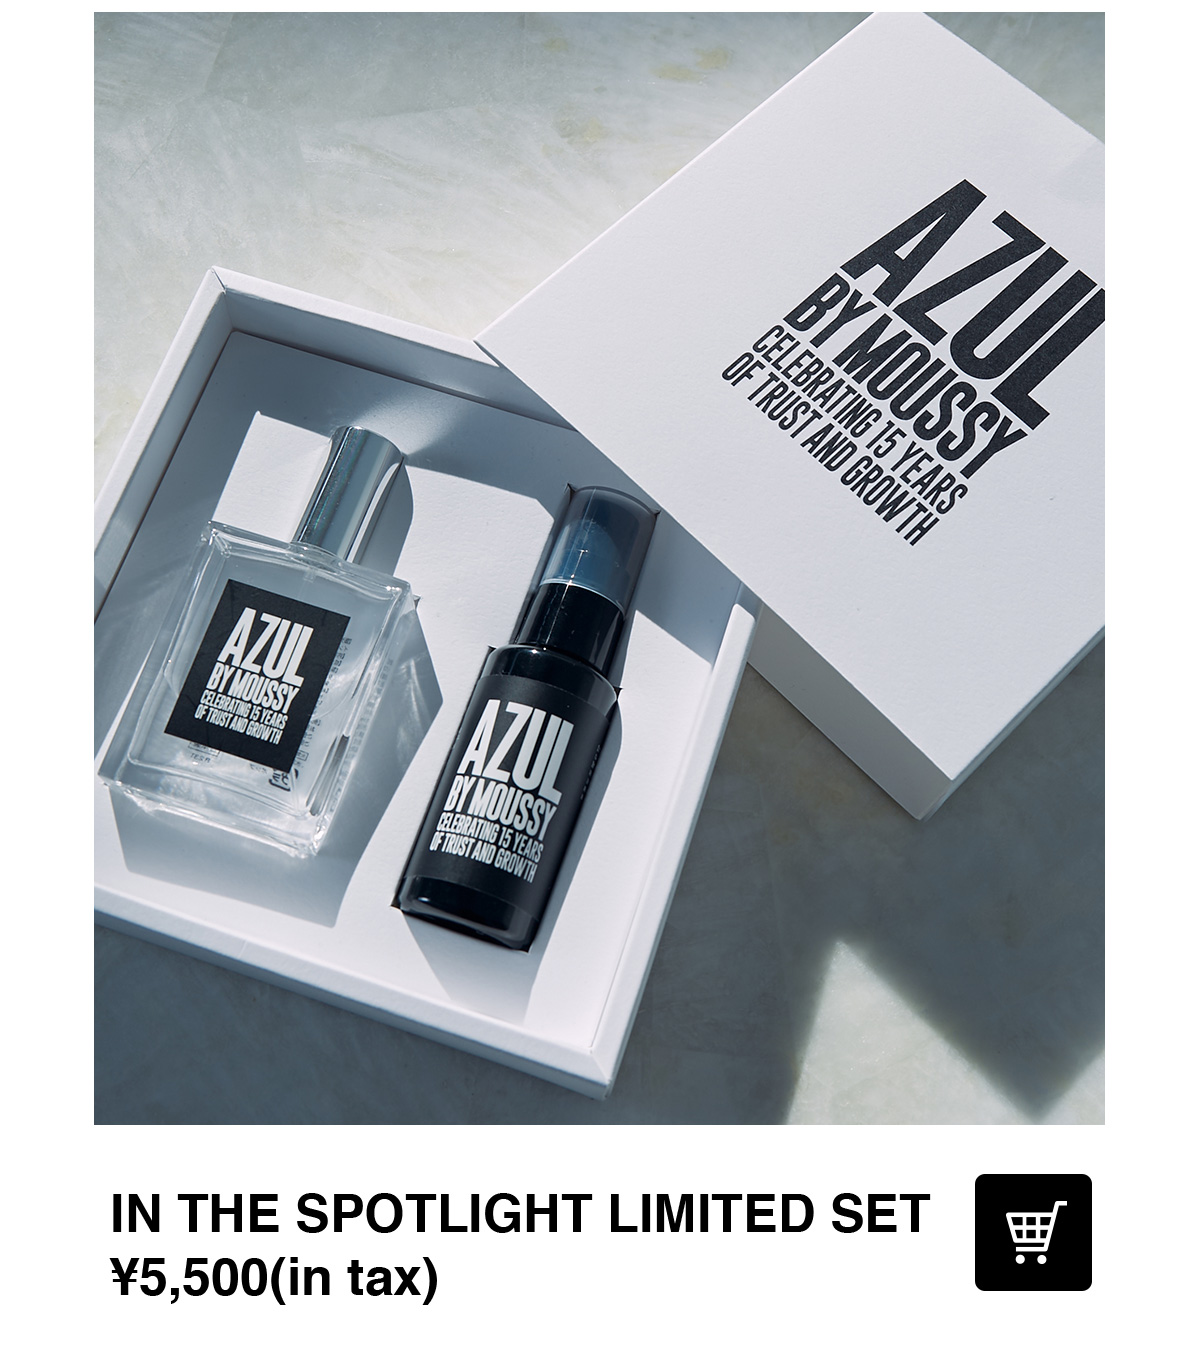 IN THE SPOTLIGHT LIMITED SET